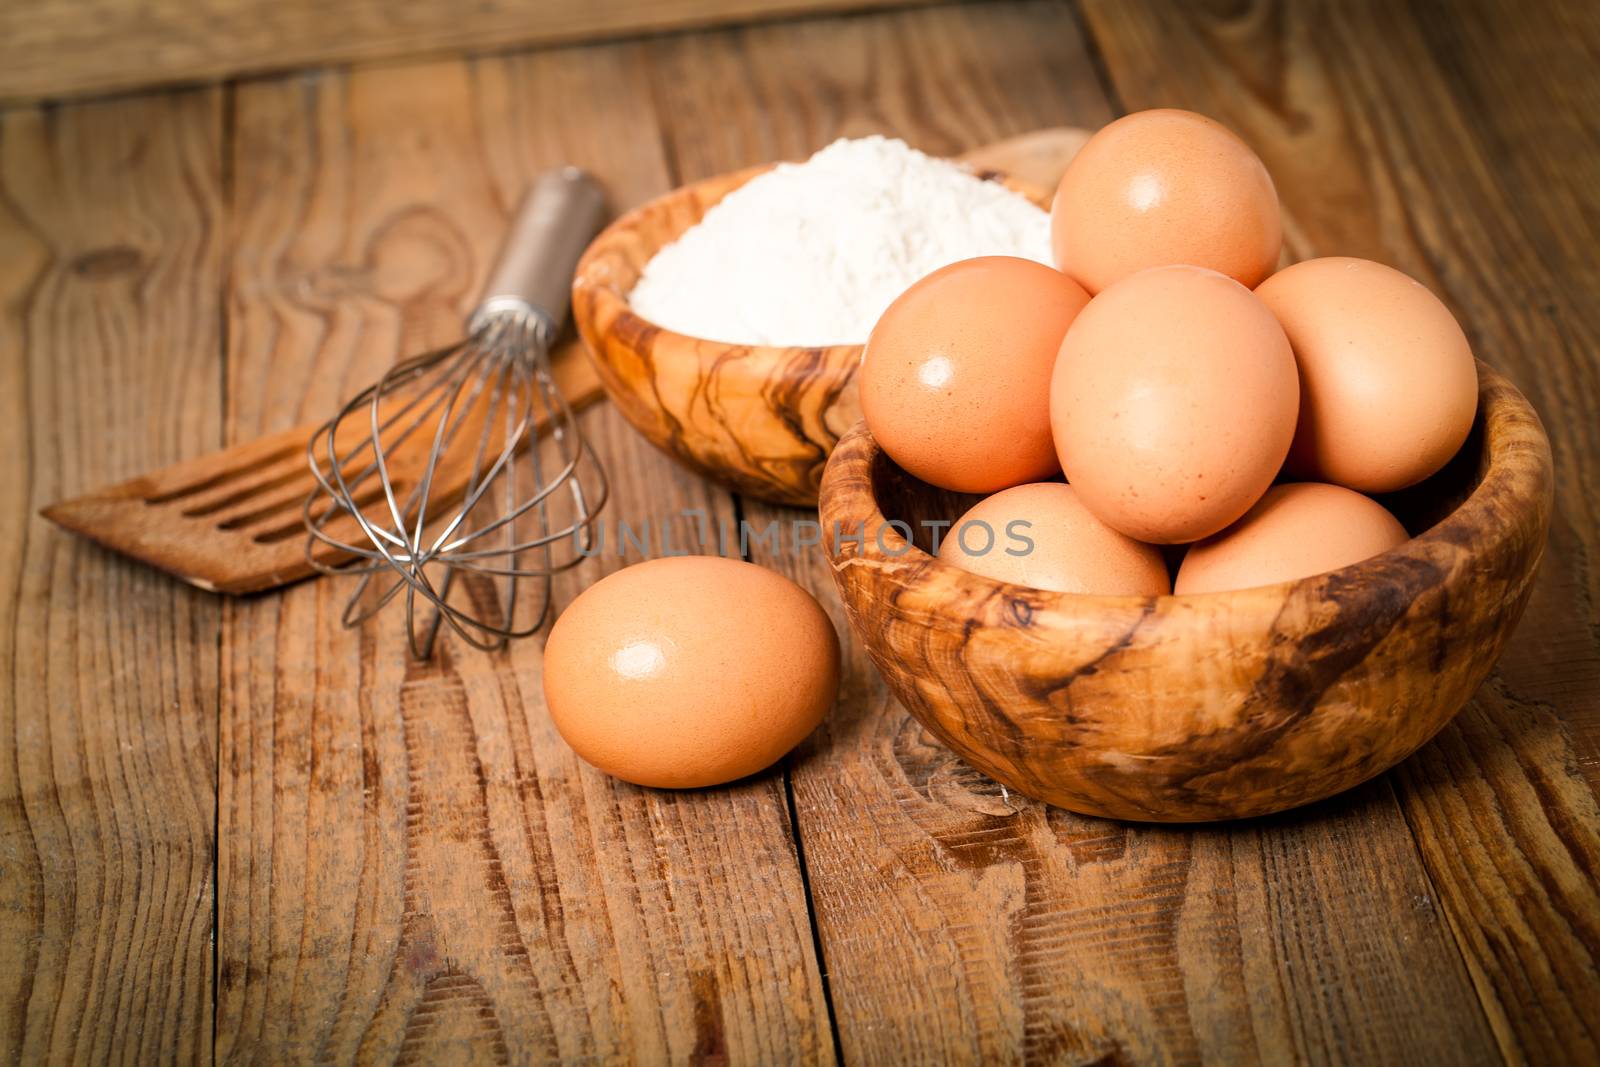 flour and eggs, ingredients for baking. on wooden background by motorolka